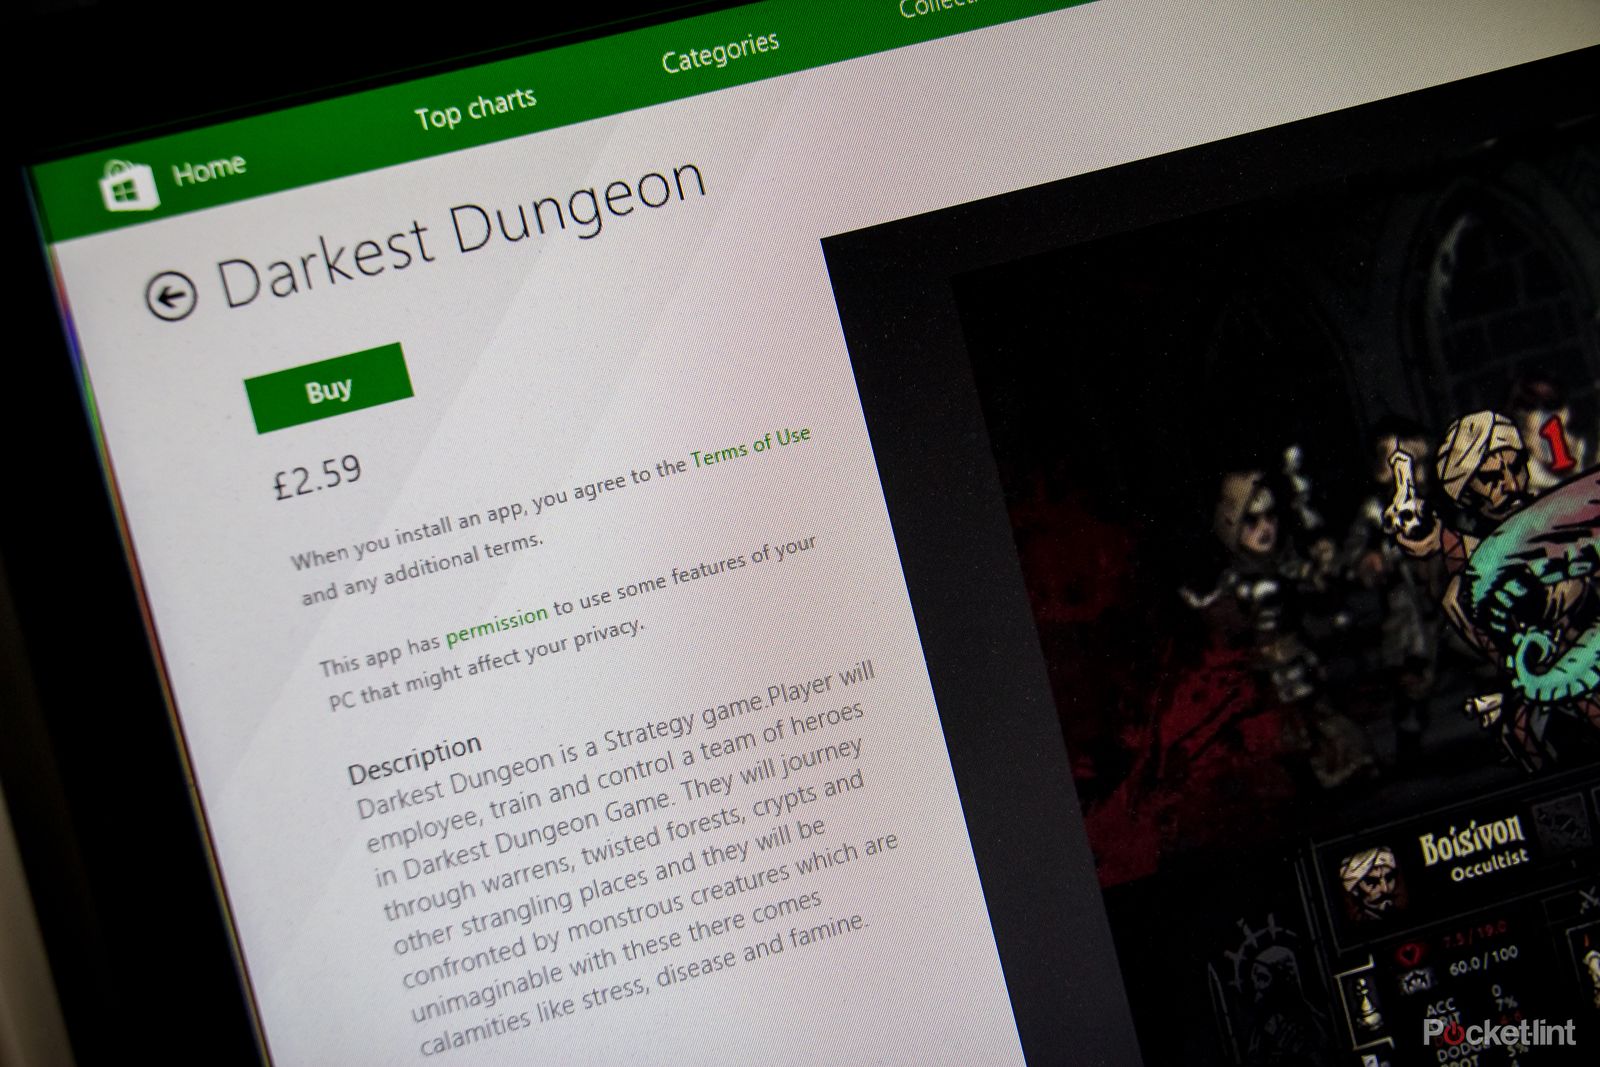 beware some of the apps you buy from windows store could be pirate copies or worse image 1